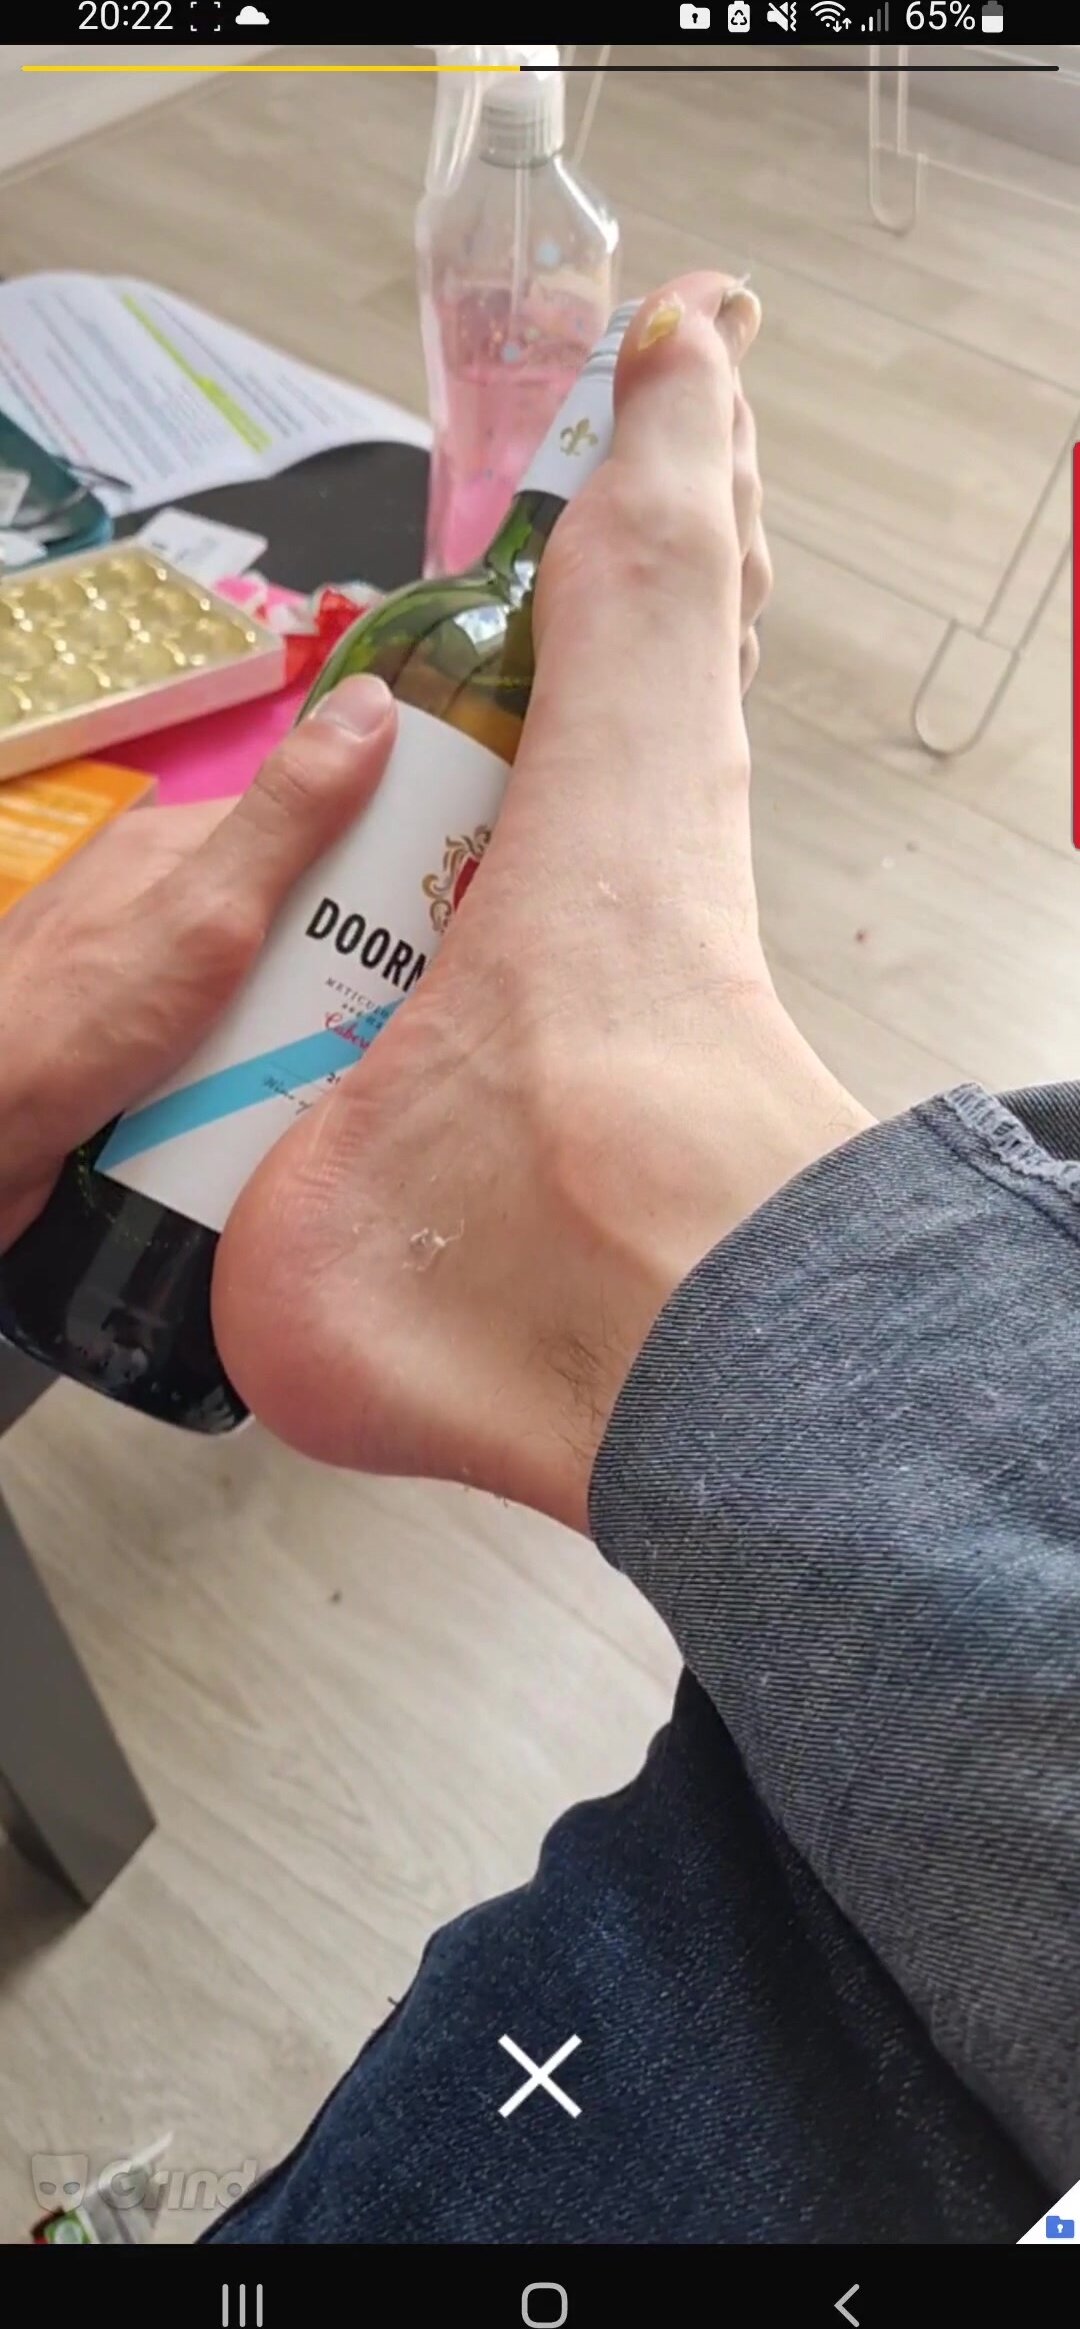 Huge feet compared to wine bottle